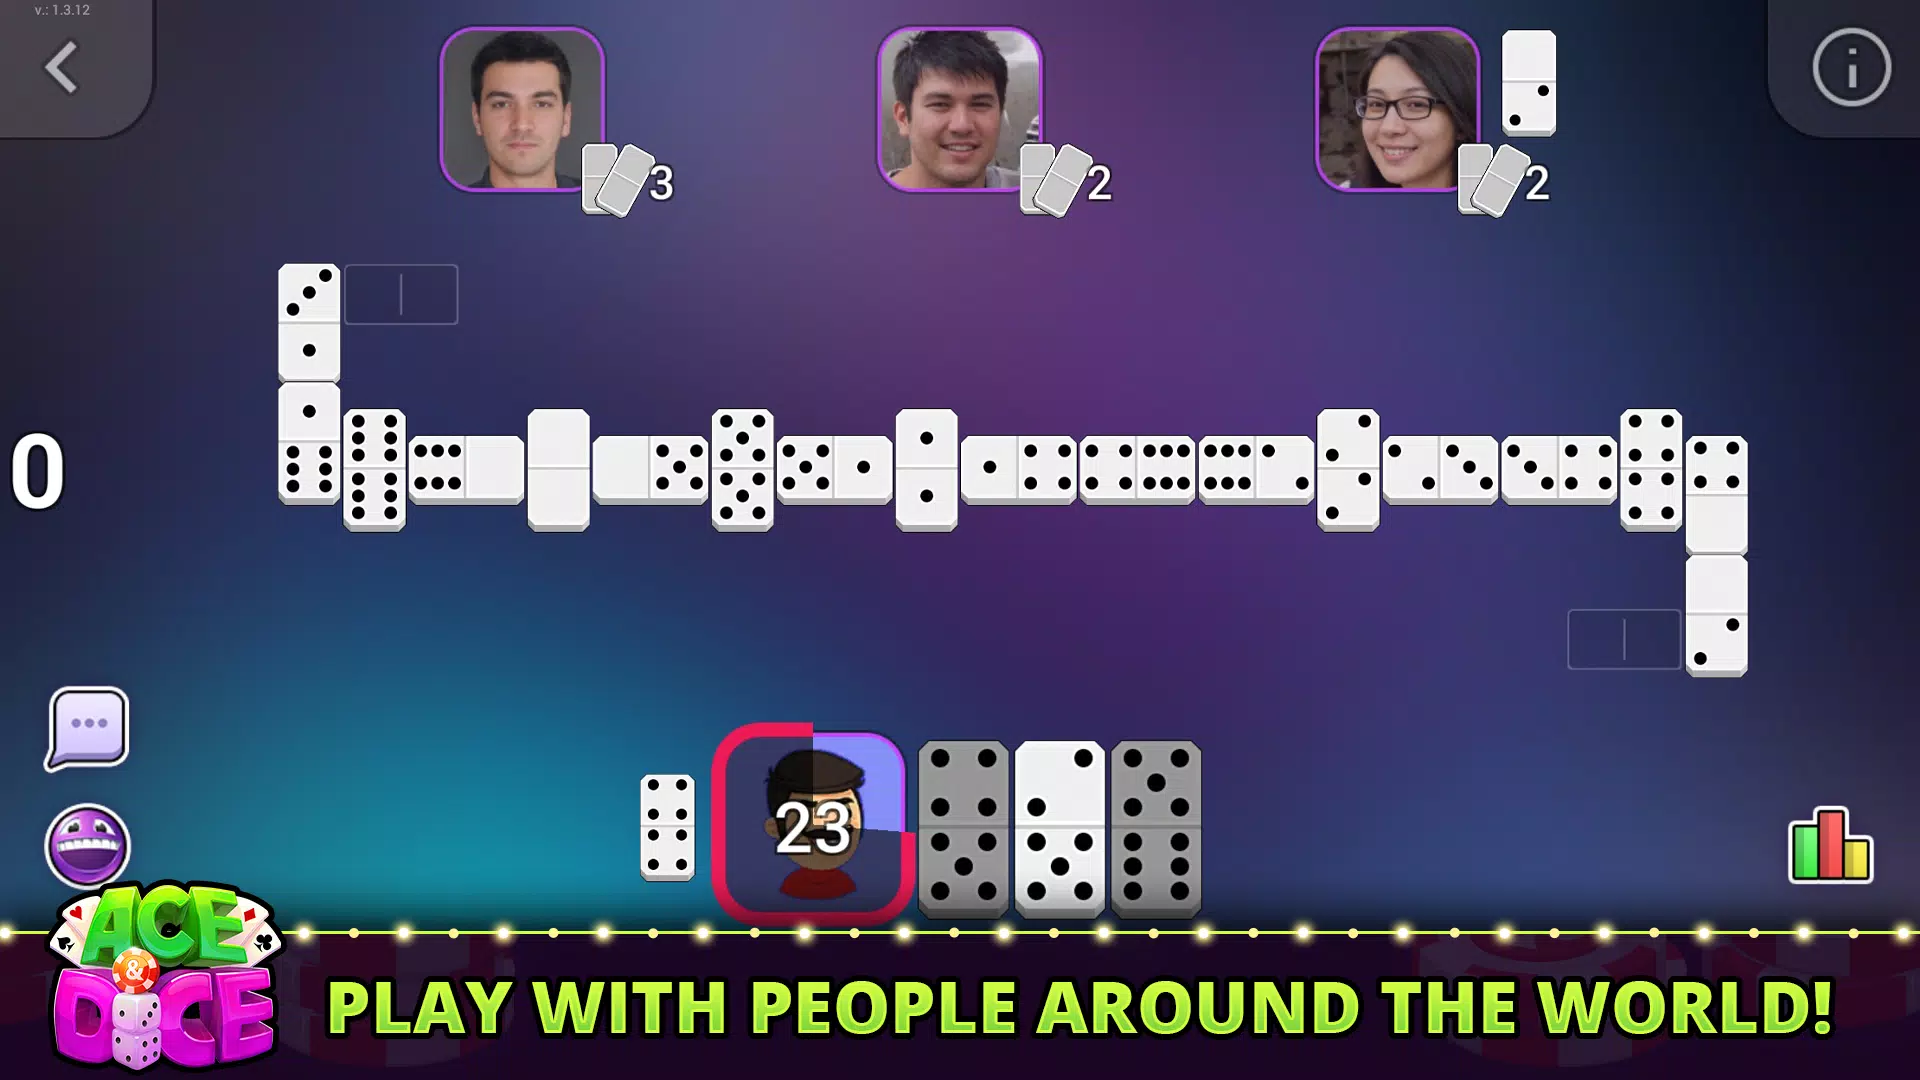 Domino - Dominos online game - Apps on Google Play